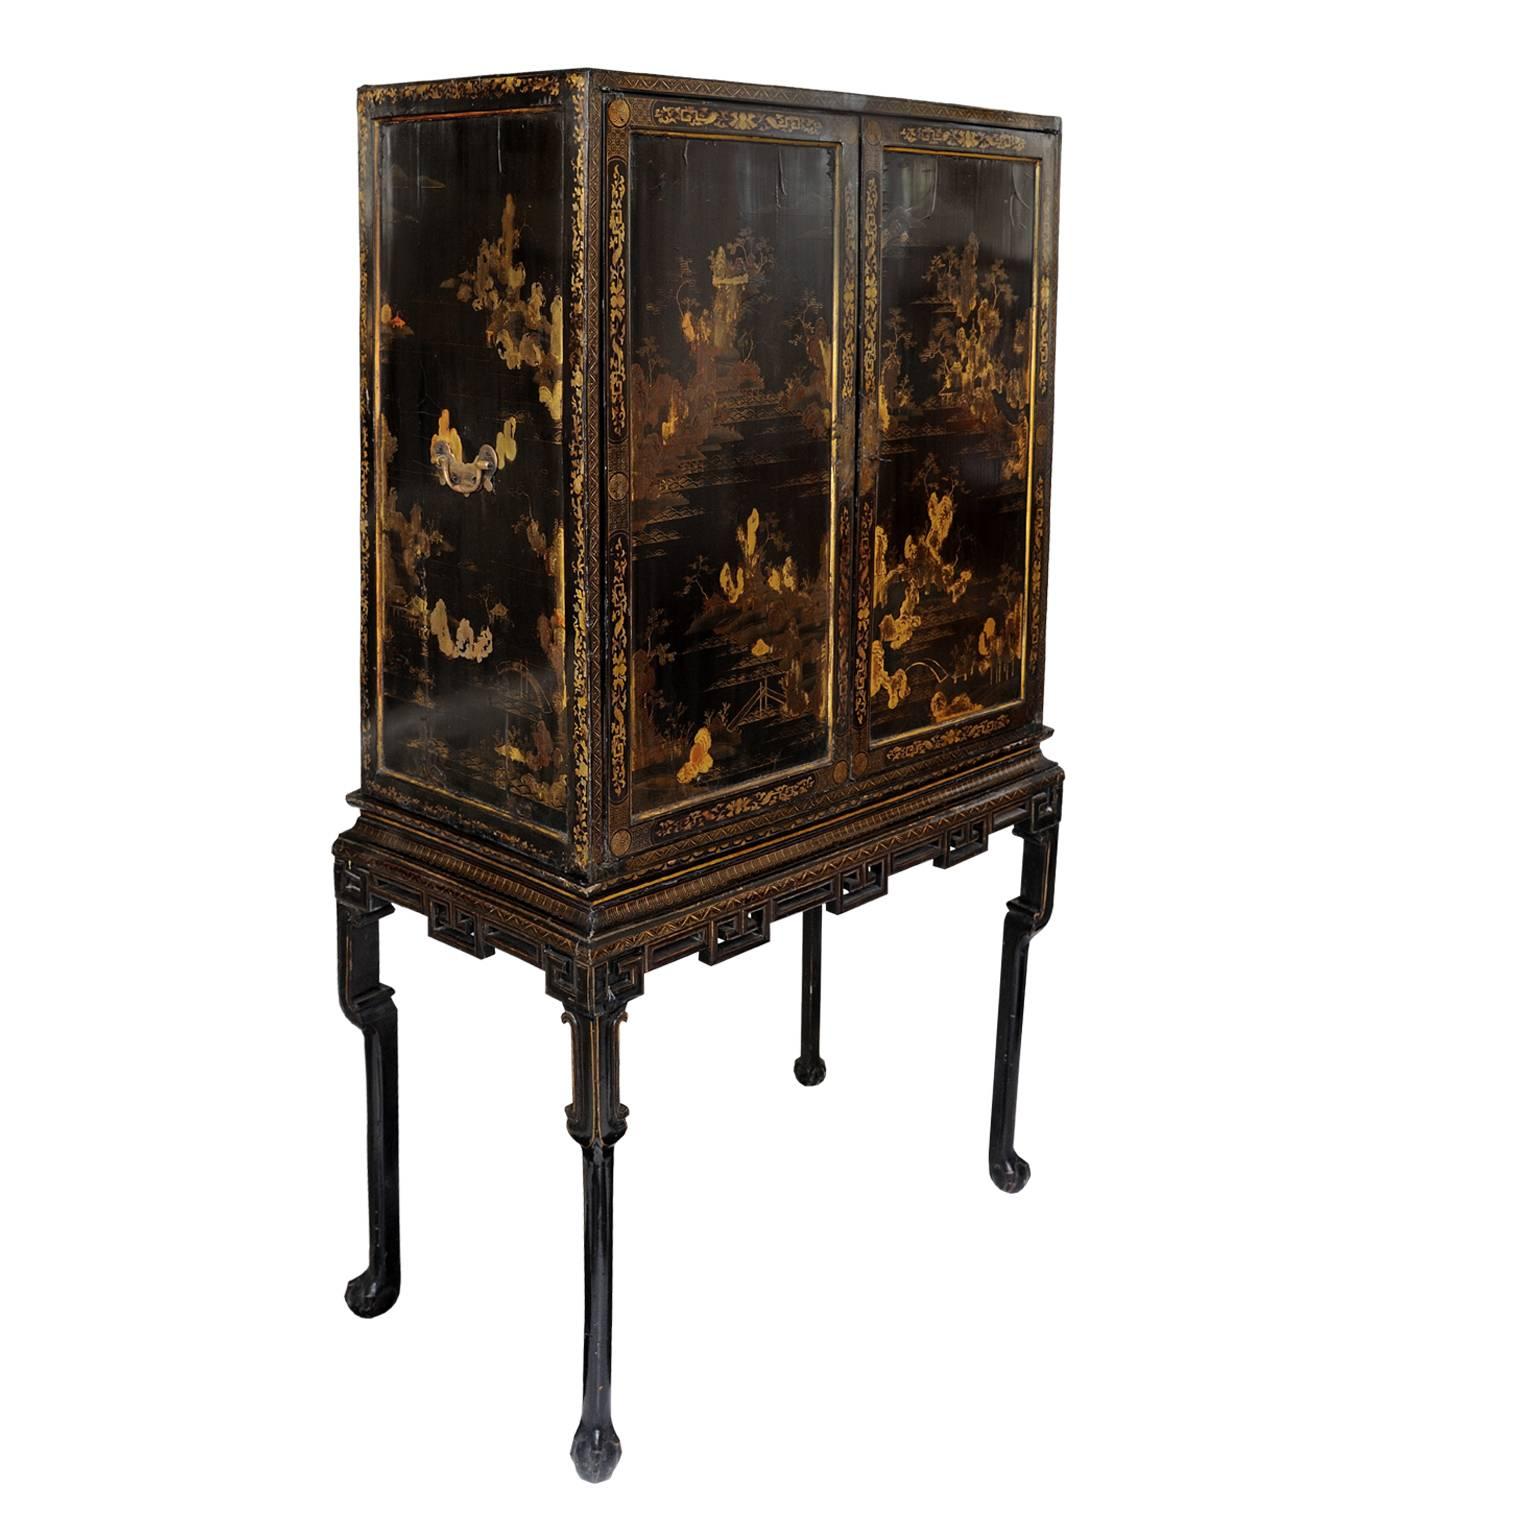 This is a rare and beautifully proportioned Chinese export George II lacquered cabinet on stand, featuring a wonderfully decorated and fully fitted interior consisting of two main lower drawers and 17 smaller draws above, circa 1740.